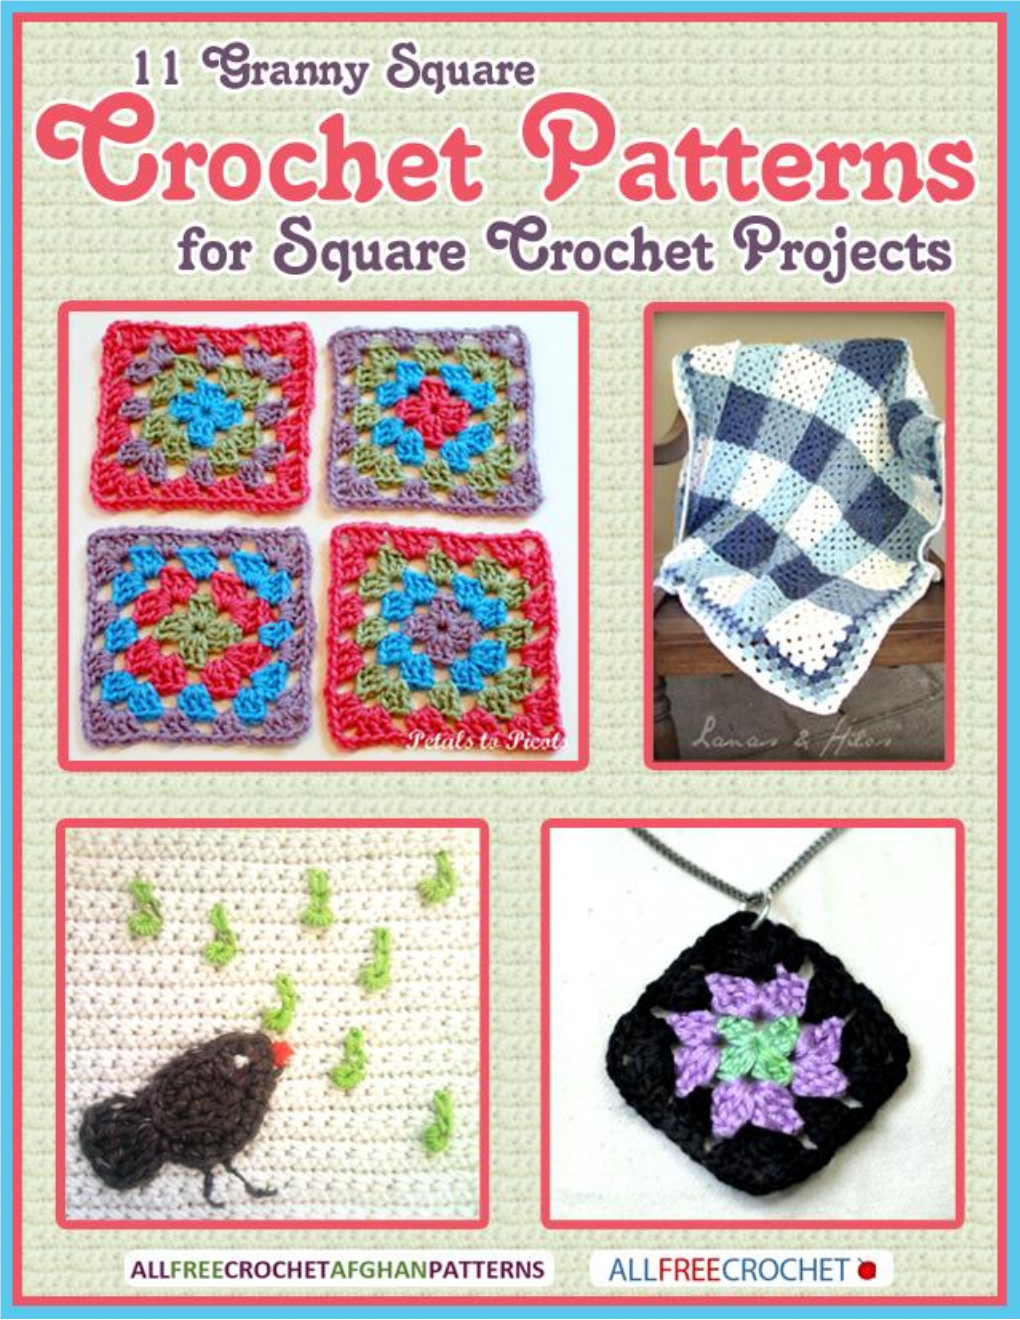 11 Granny Square Crochet Patterns for Square Crochet Projects Copyright 2013 by Prime Publishing LLC